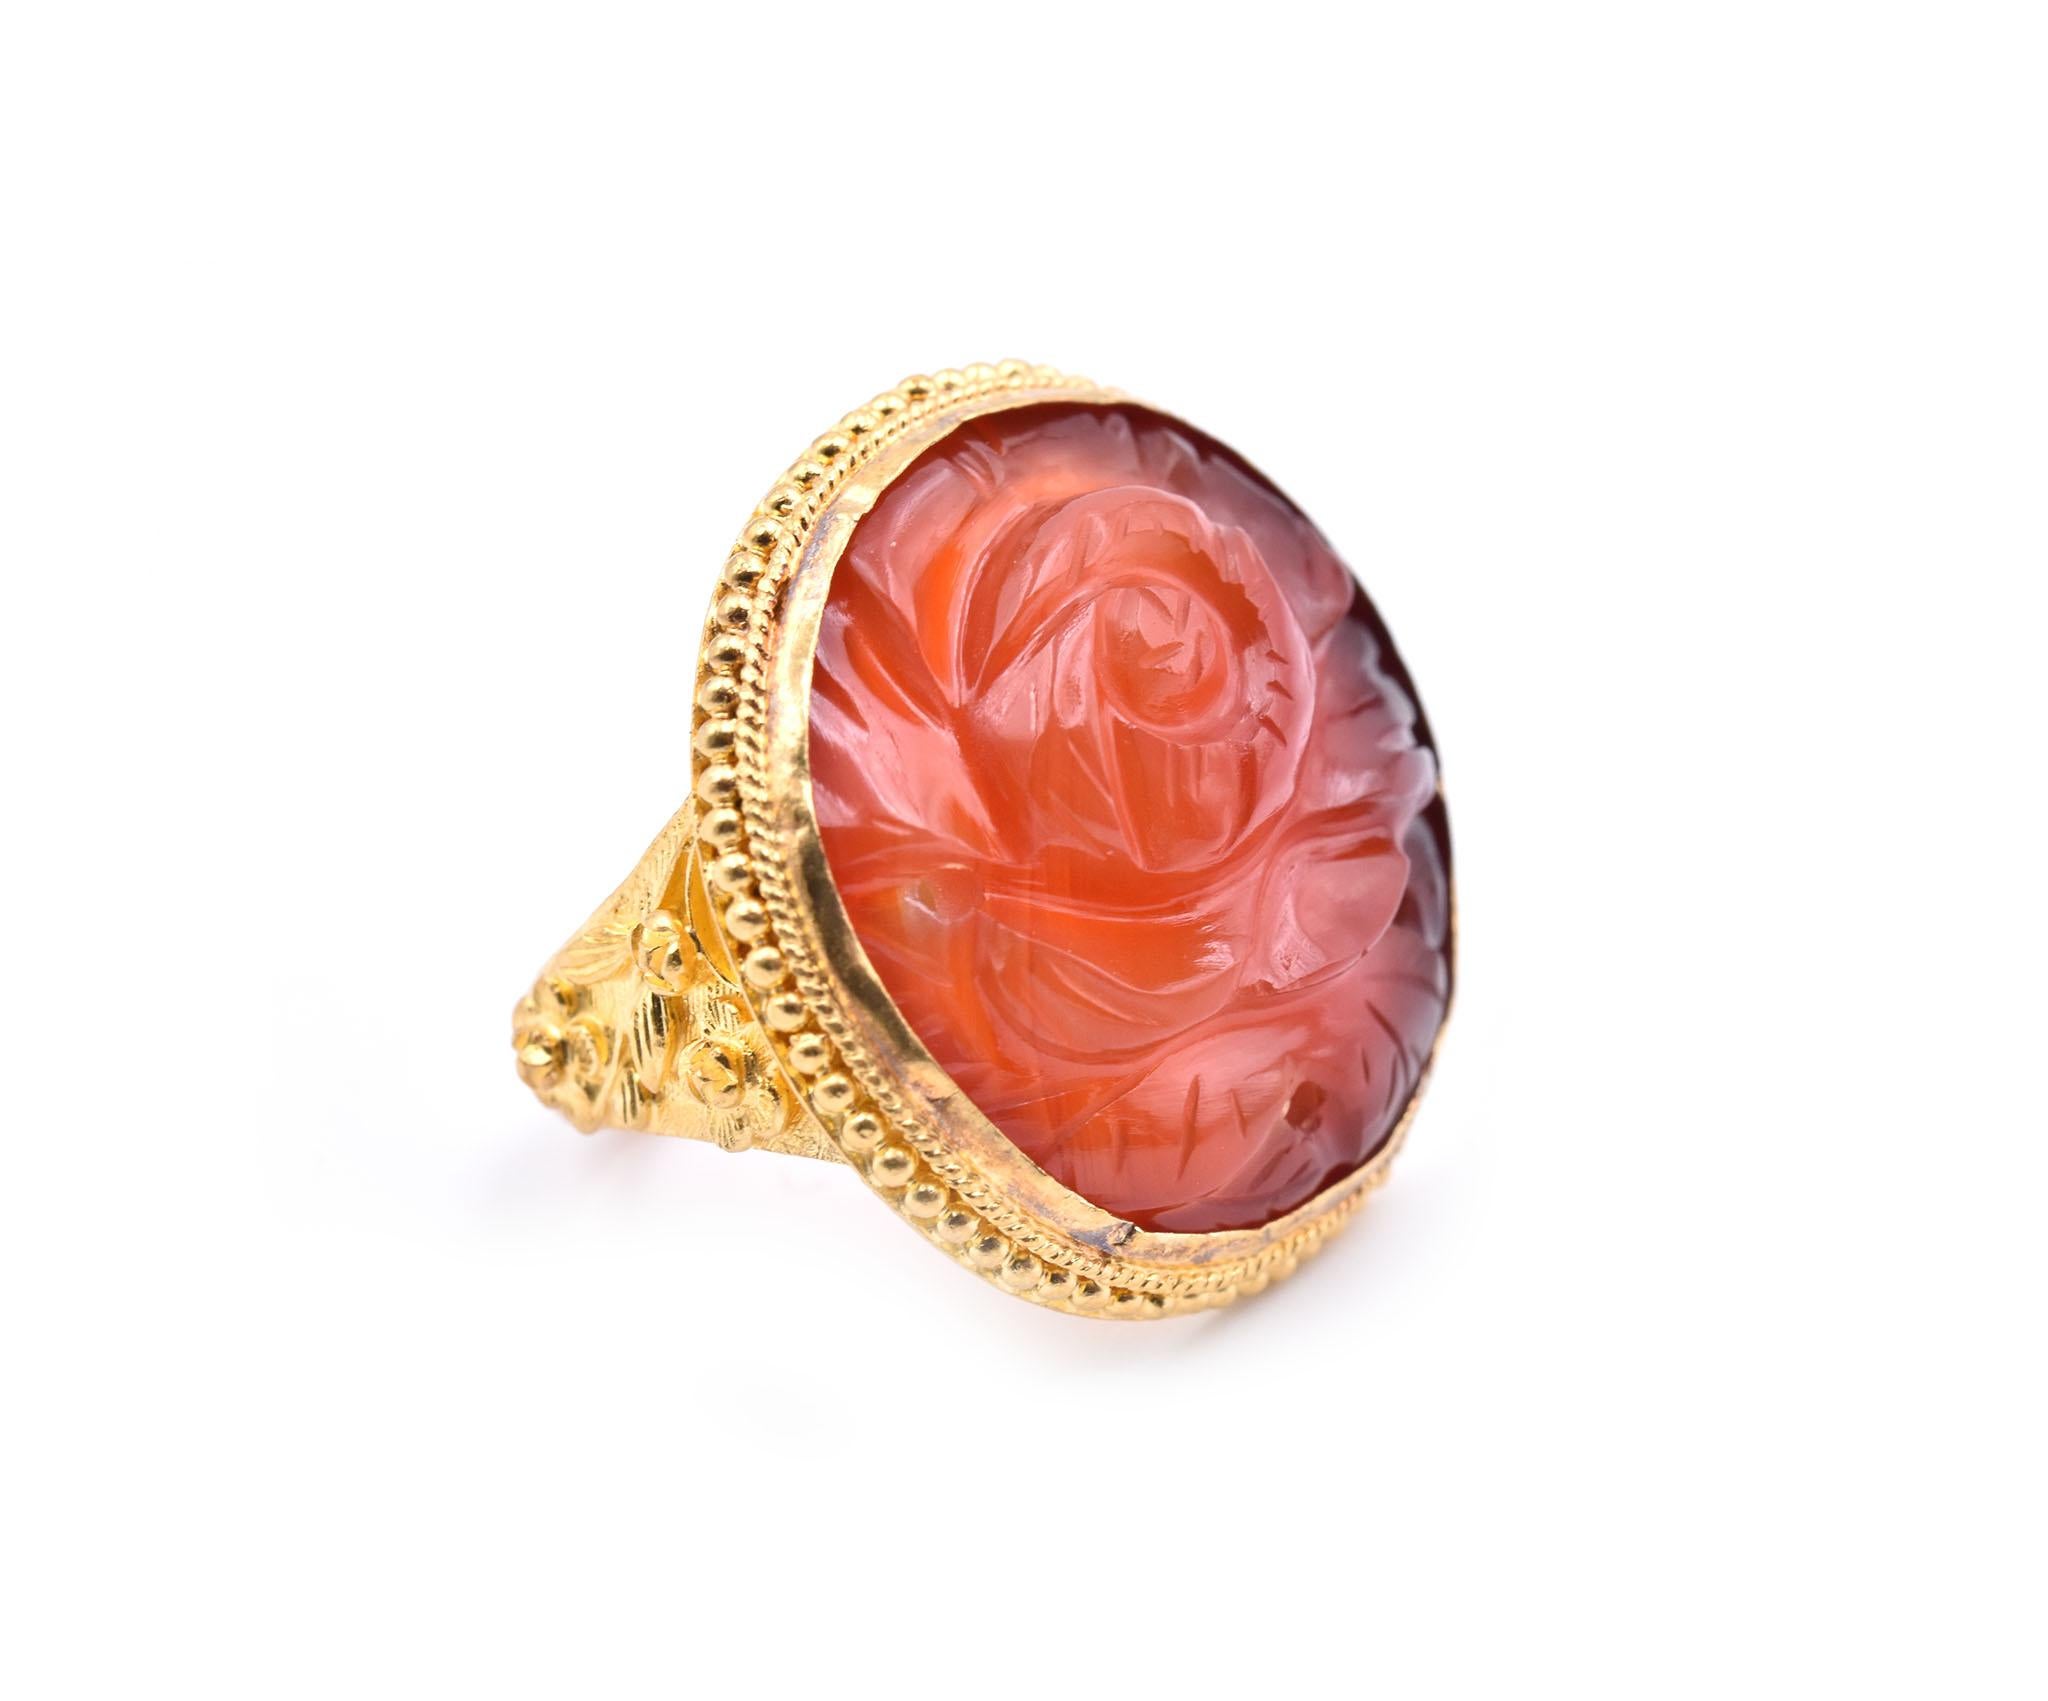 Designer: custom design
Material: 24k yellow gold
Gemstone: Rose Jade
Ring size: 4 (please allow two additional shipping days for sizing requests) 
Dimensions: ring top measures 23.60mm in diameter
Weight: 9.89 grams
